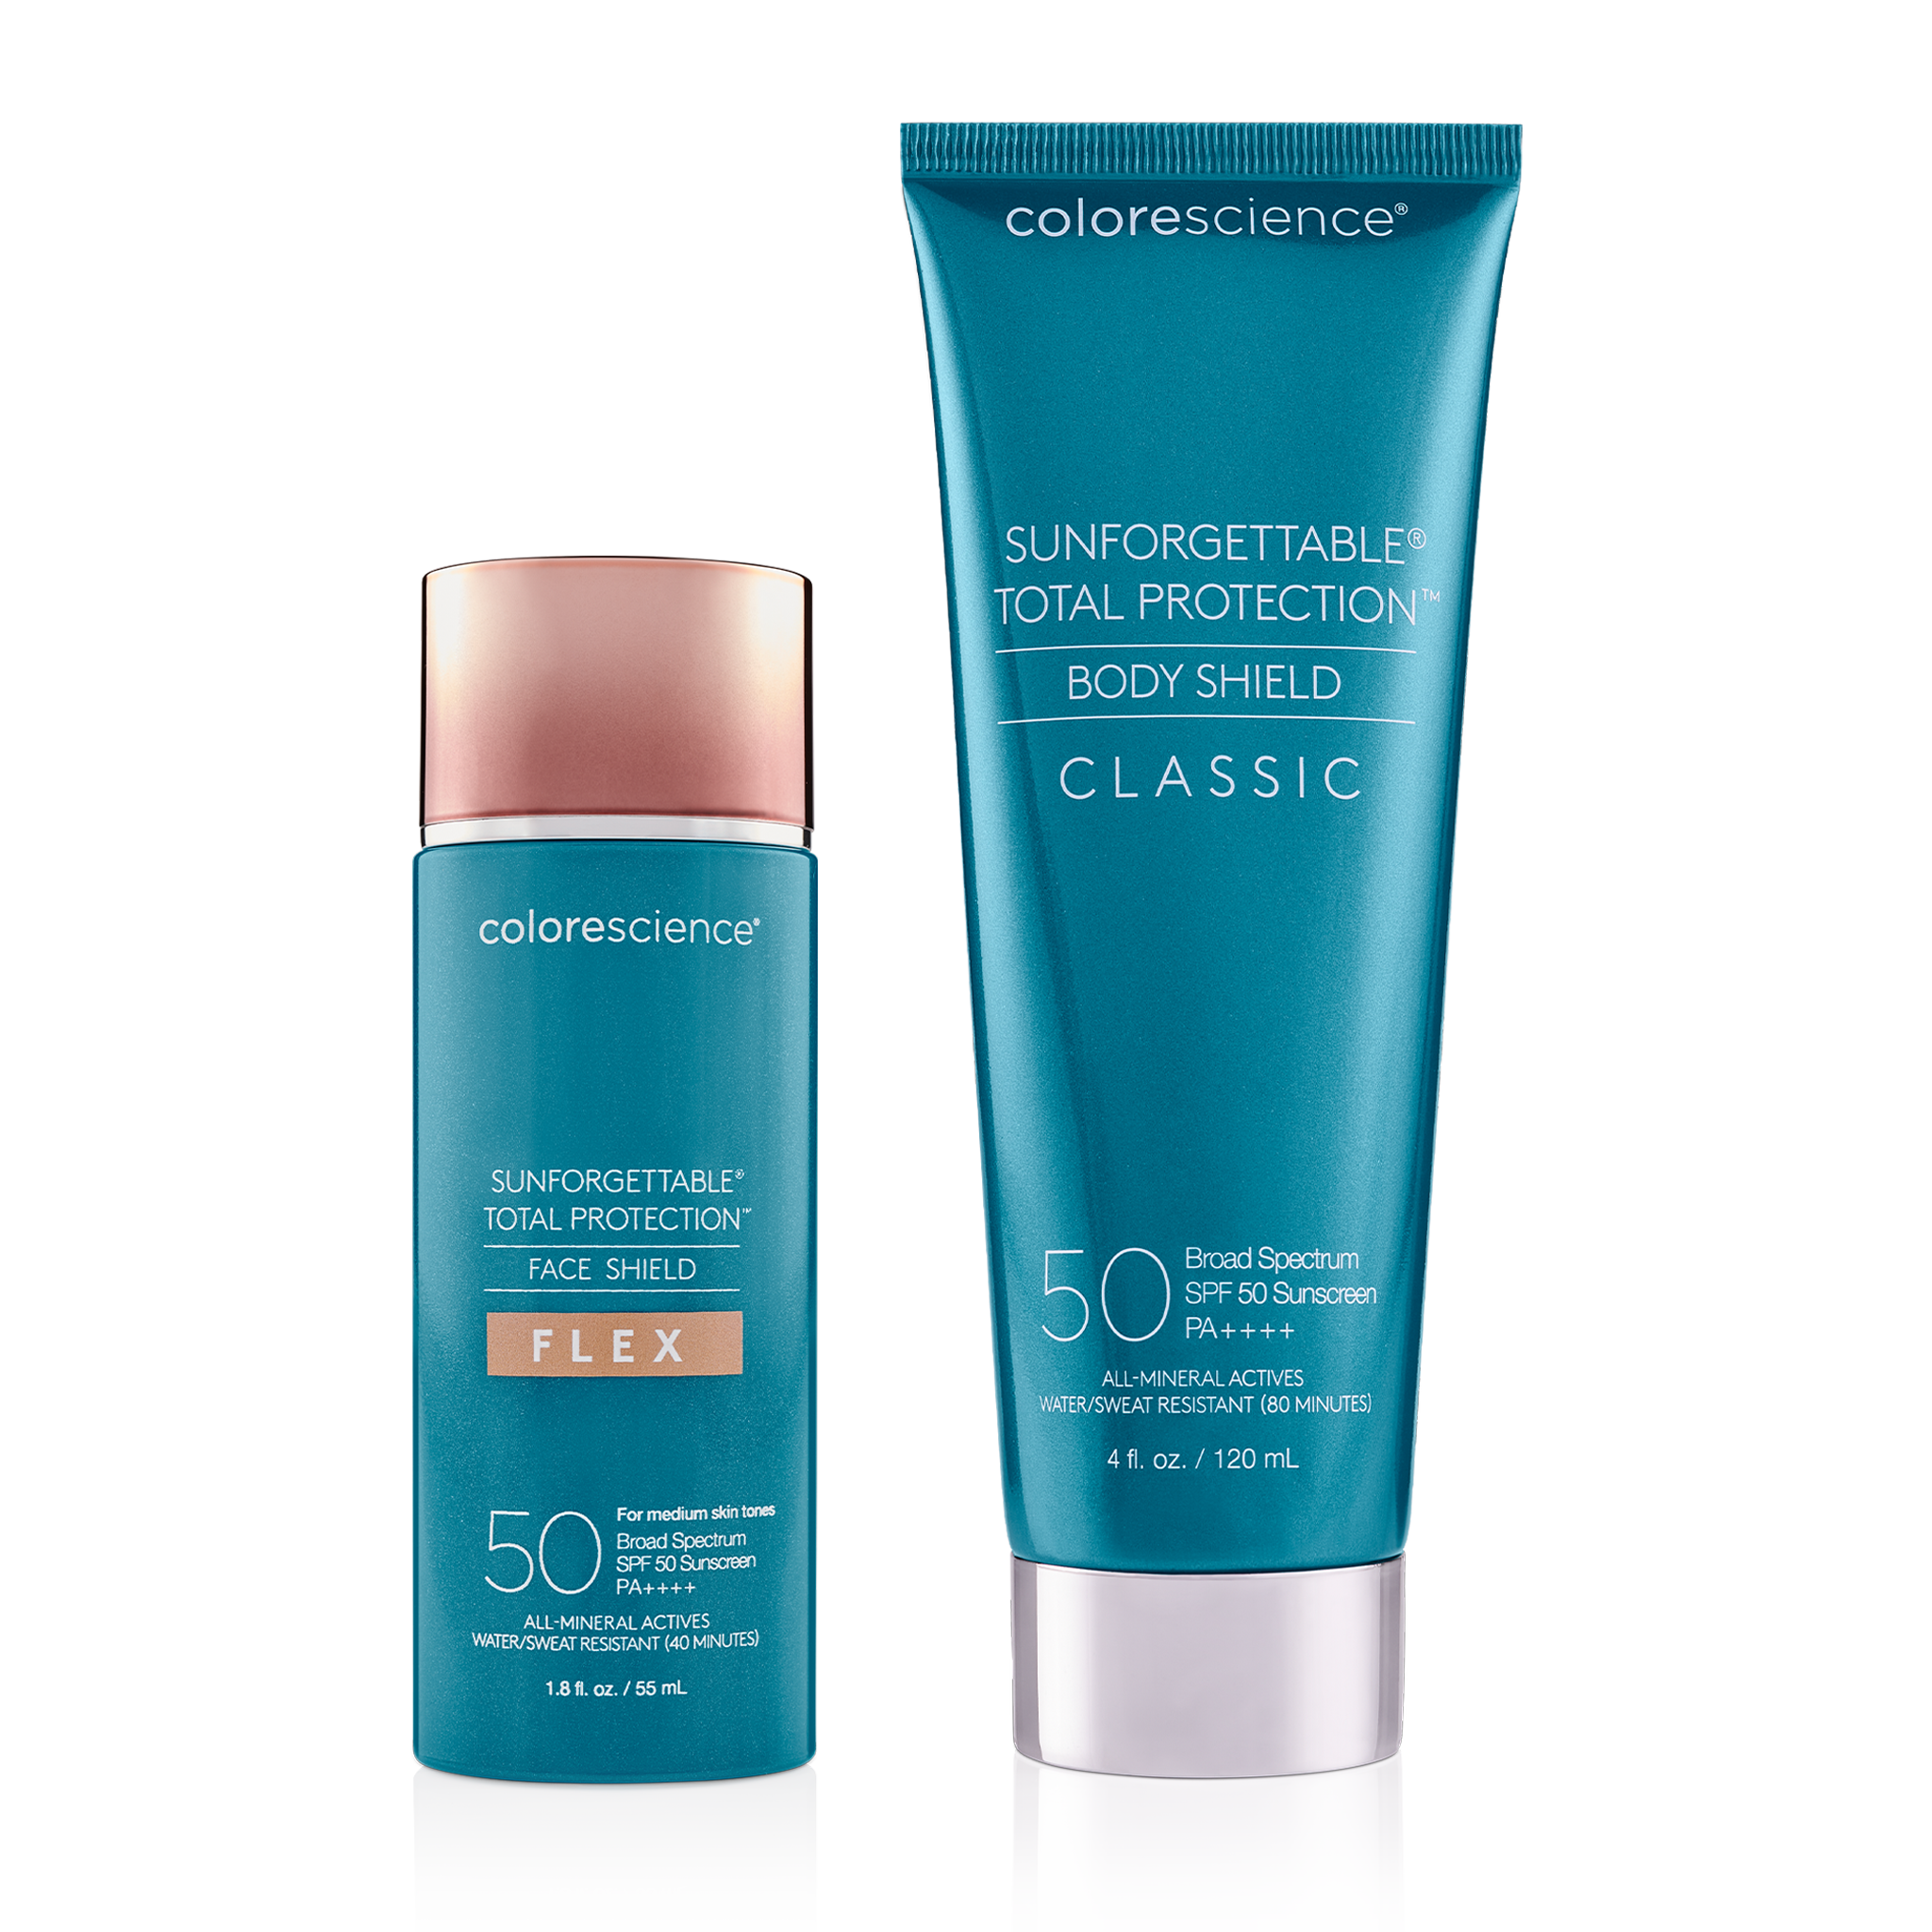 Sunforgettable® Total Protection™ Face Shield Flex SPF 50 and Body Shield Classic SPF 50 || all